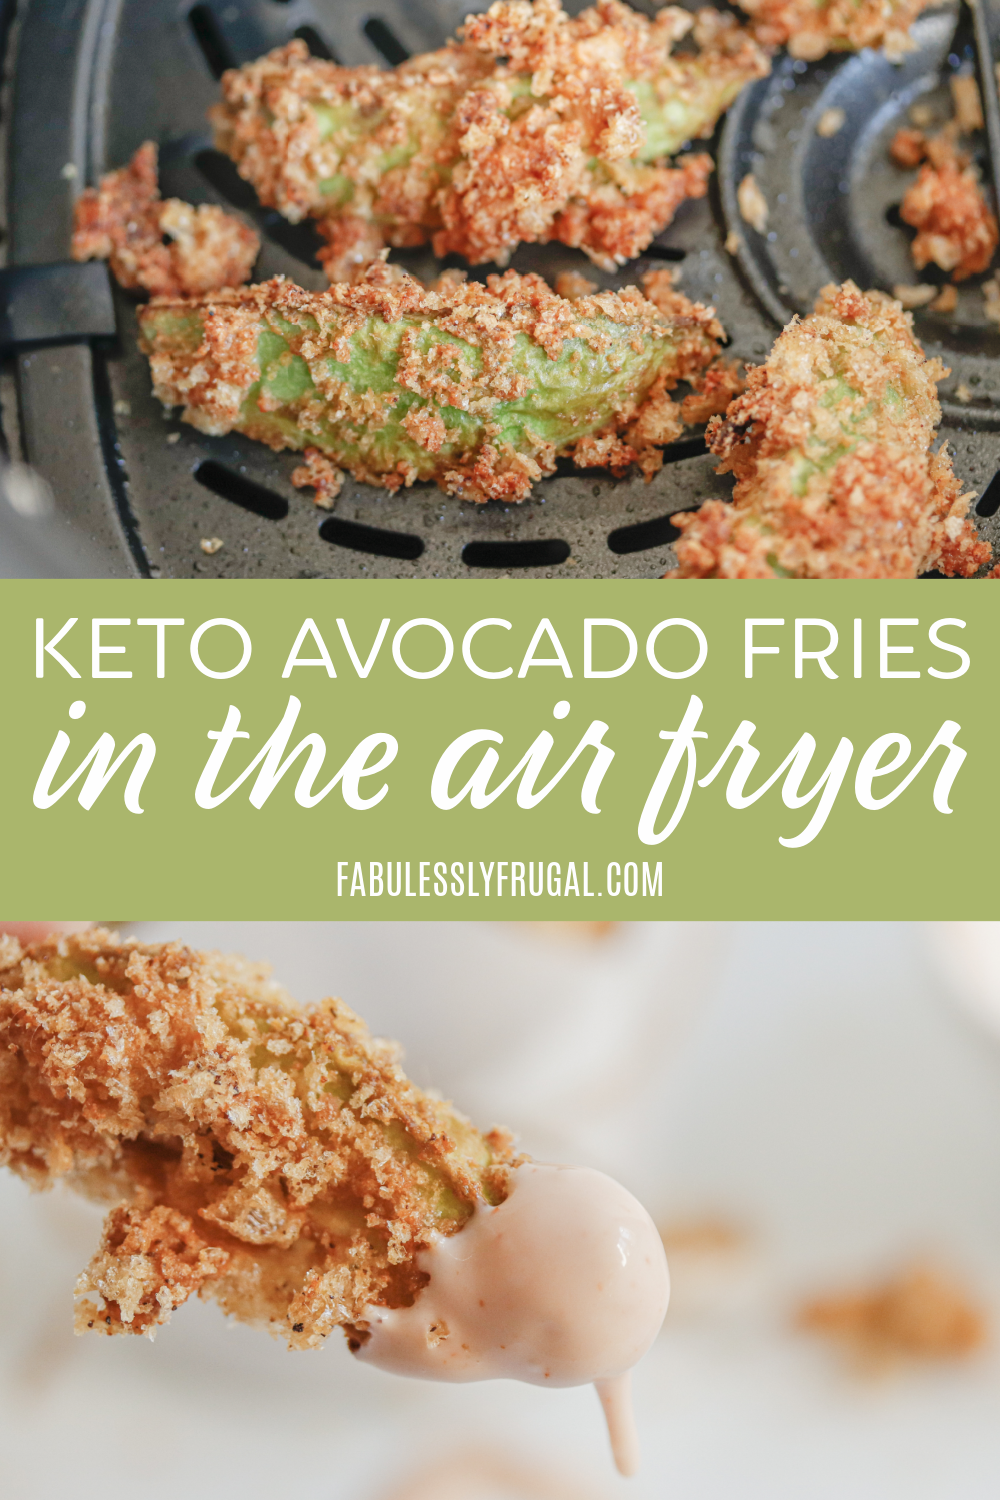 You will love these crunchy, healthy, and keto friendly avocado fries in the air fryer